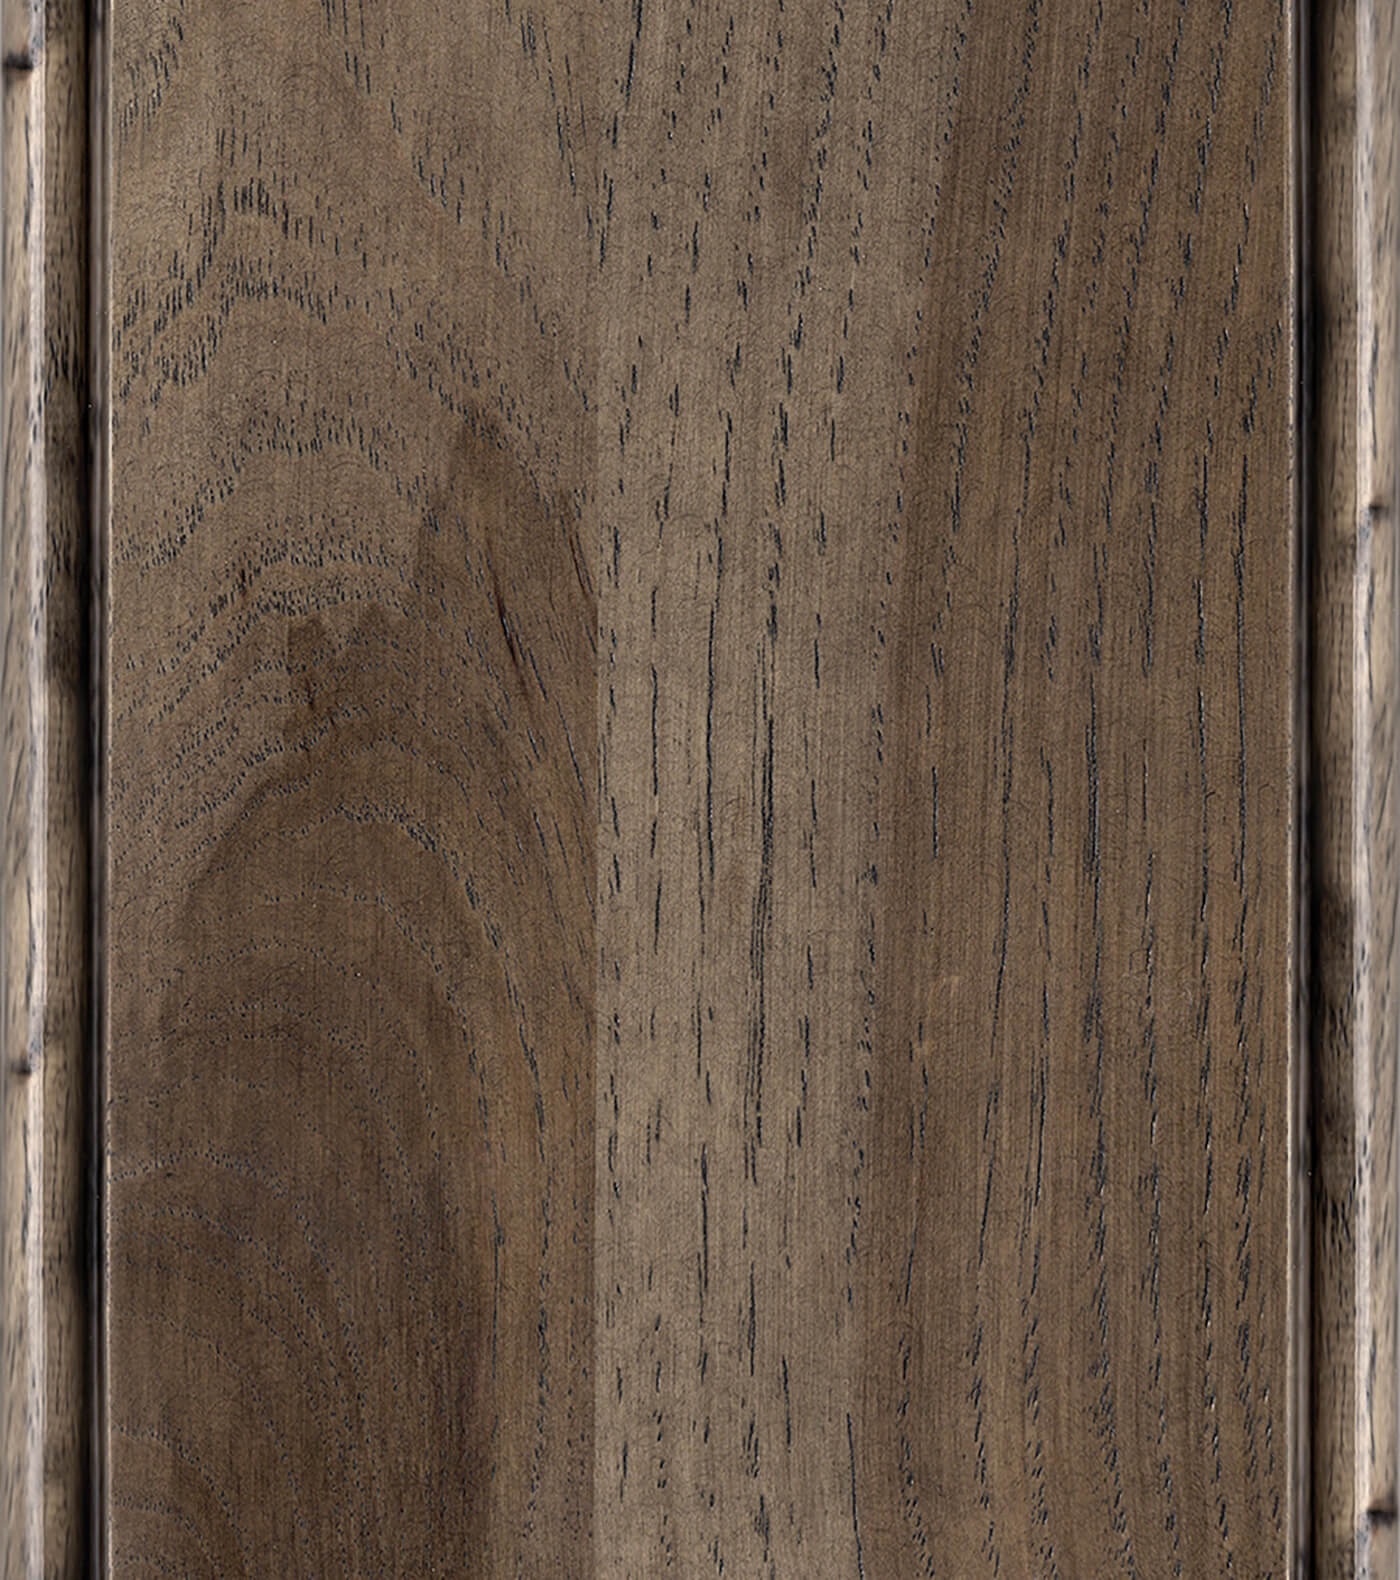 Caraway Stain on Hickory or Rustic Hickory